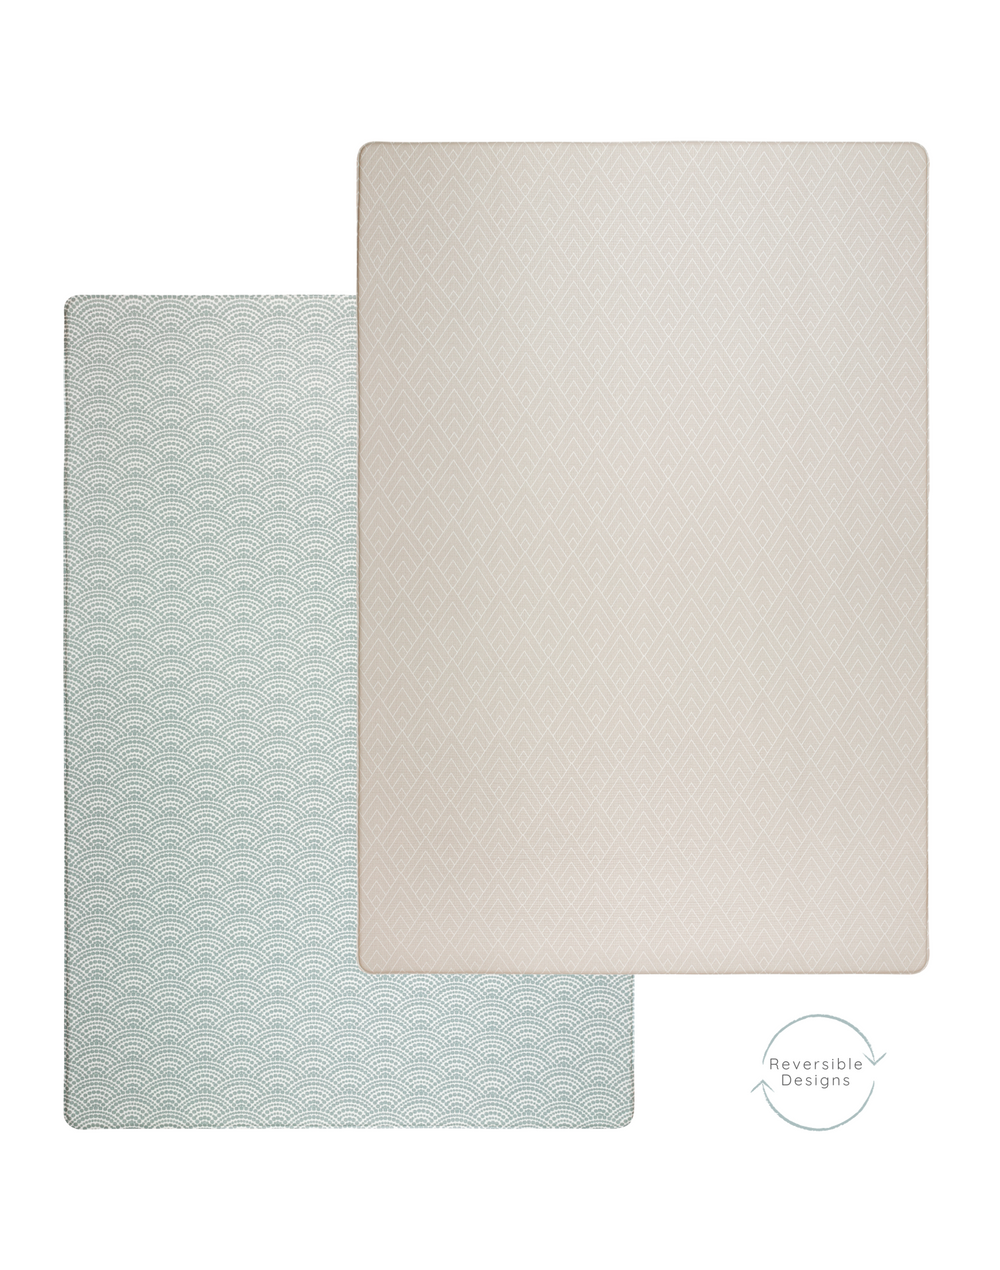 Reversible double sided play mat with neutral motifs for a stylish look in the family home